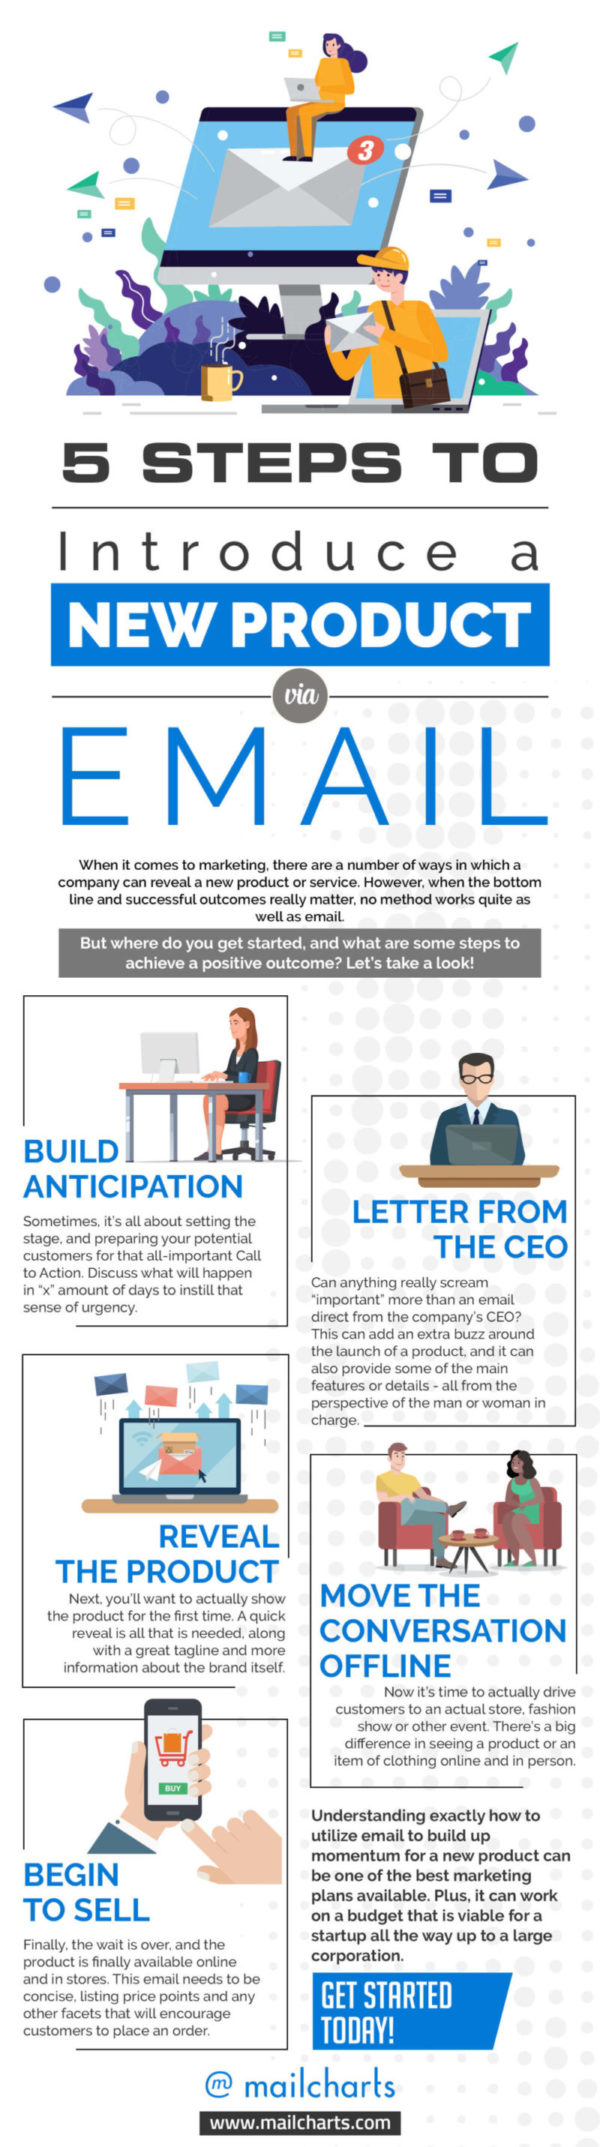 5 Steps to Introduce a New Product Via Email [INFOGRAPHIC]